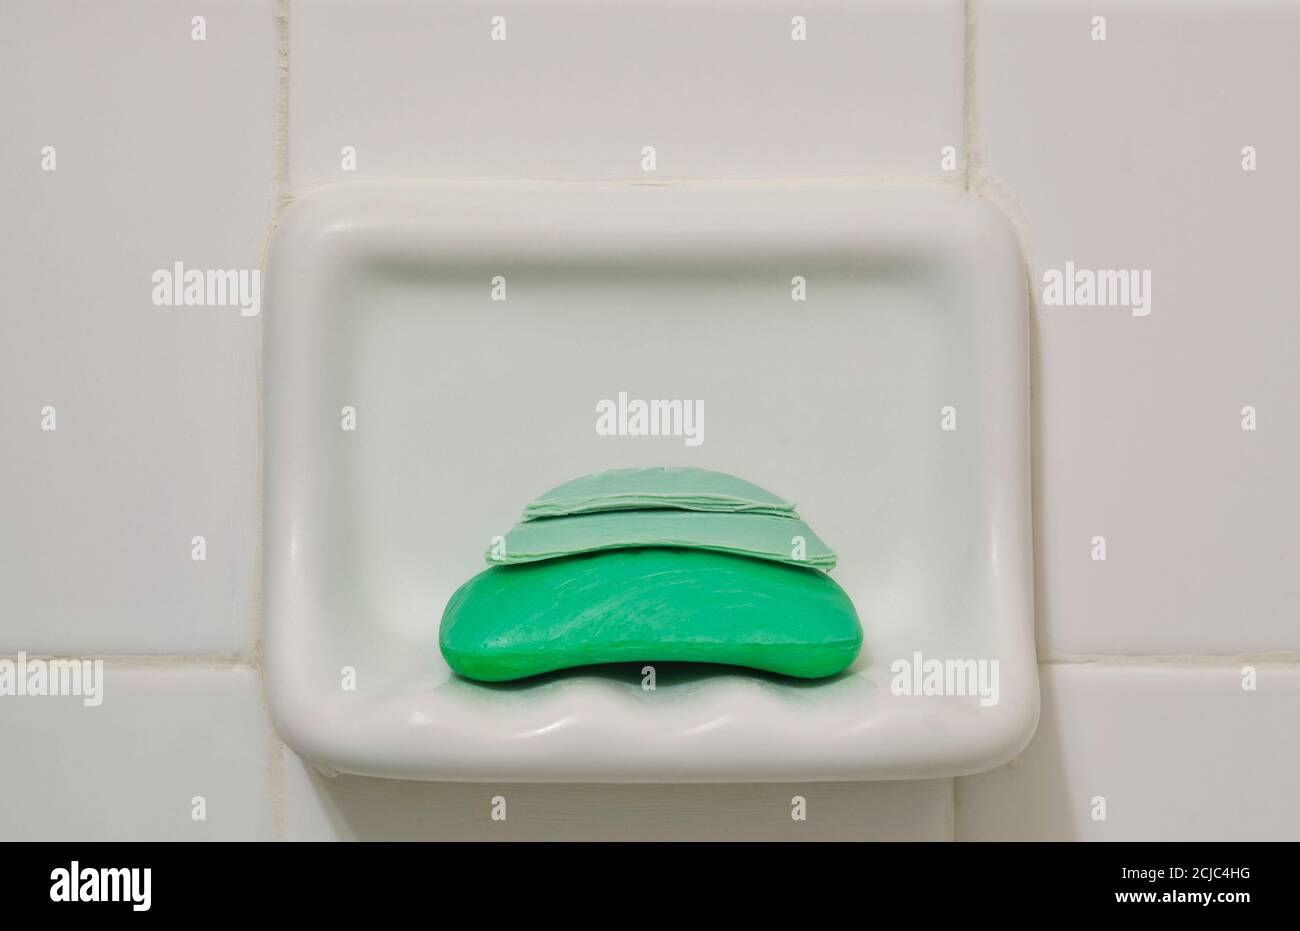 https://c8.alamy.com/comp/2CJC4HG/old-scrap-soap-bars-attached-to-a-new-one-in-a-bathroom-shower-holder-and-white-tile-background-recycling-of-waste-concept-2CJC4HG.jpg